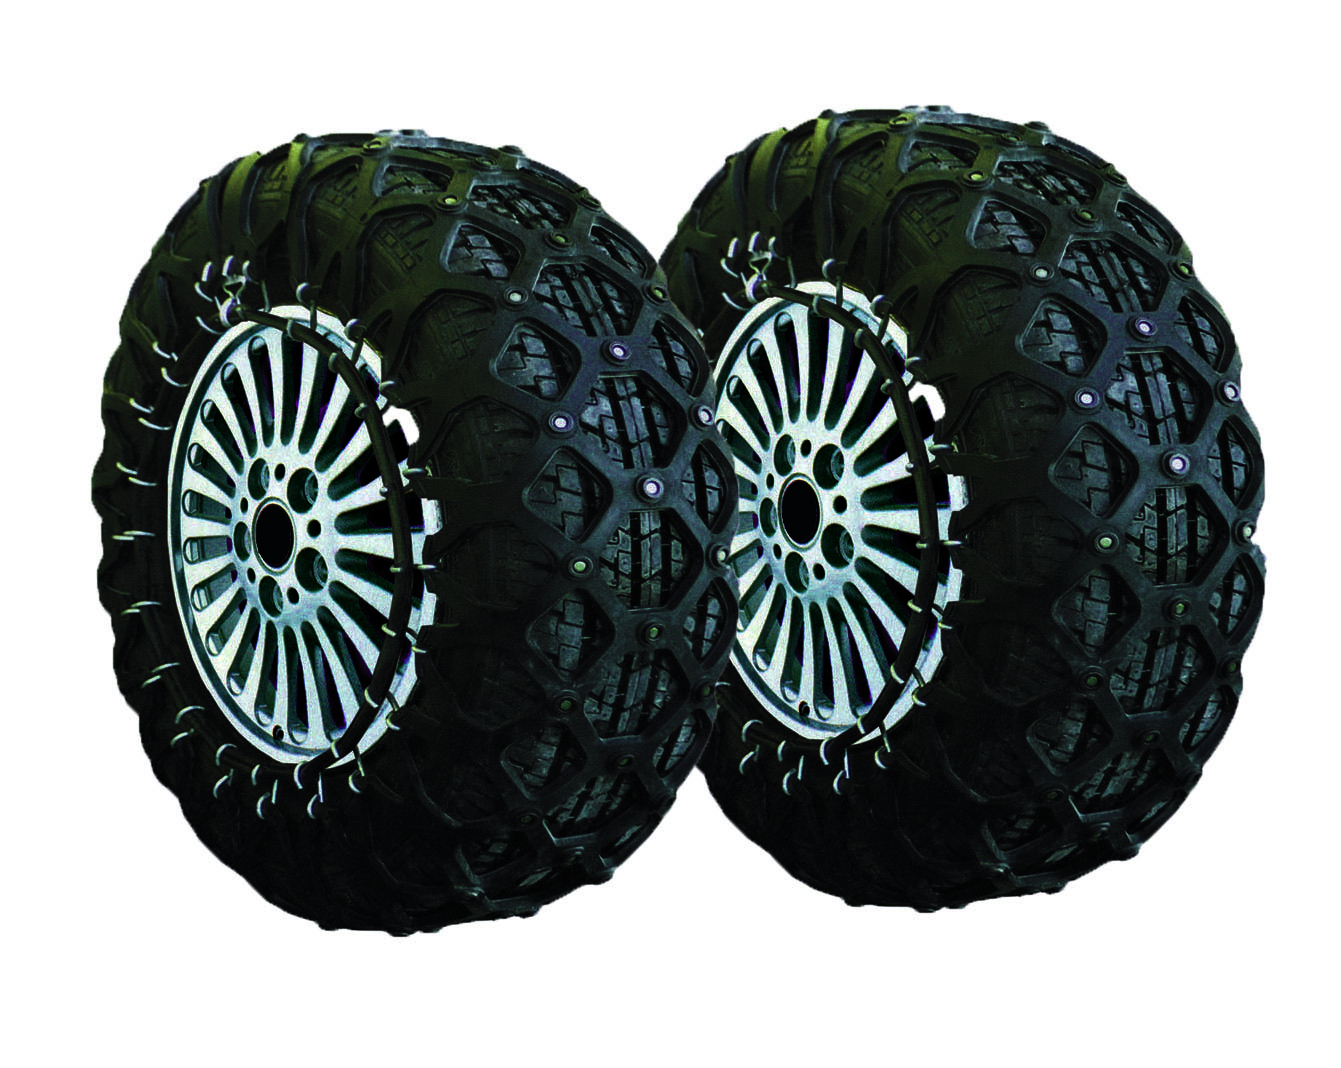 Jeremywell Anti Slip Natural Rubber Snow Tire Chain fits 205/75R15,225/60R16,235/55R17